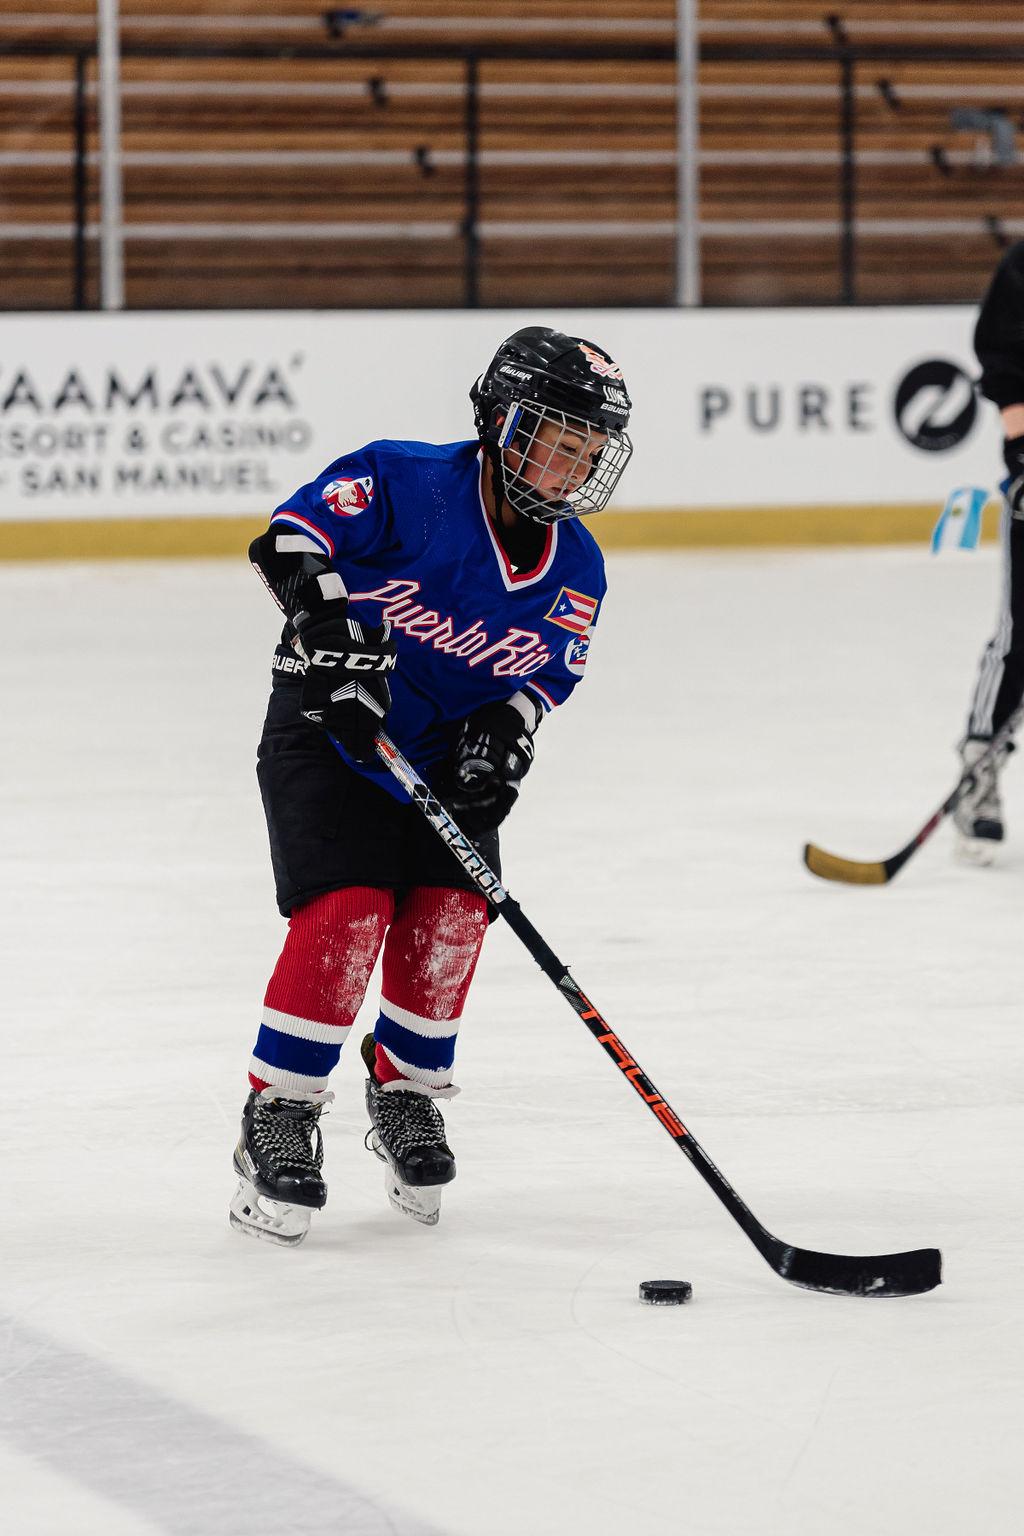 A child from 24 Degrees of Color plays on the ice in a jersey representing his heritage. Photo credit: Jason C Williams Photography